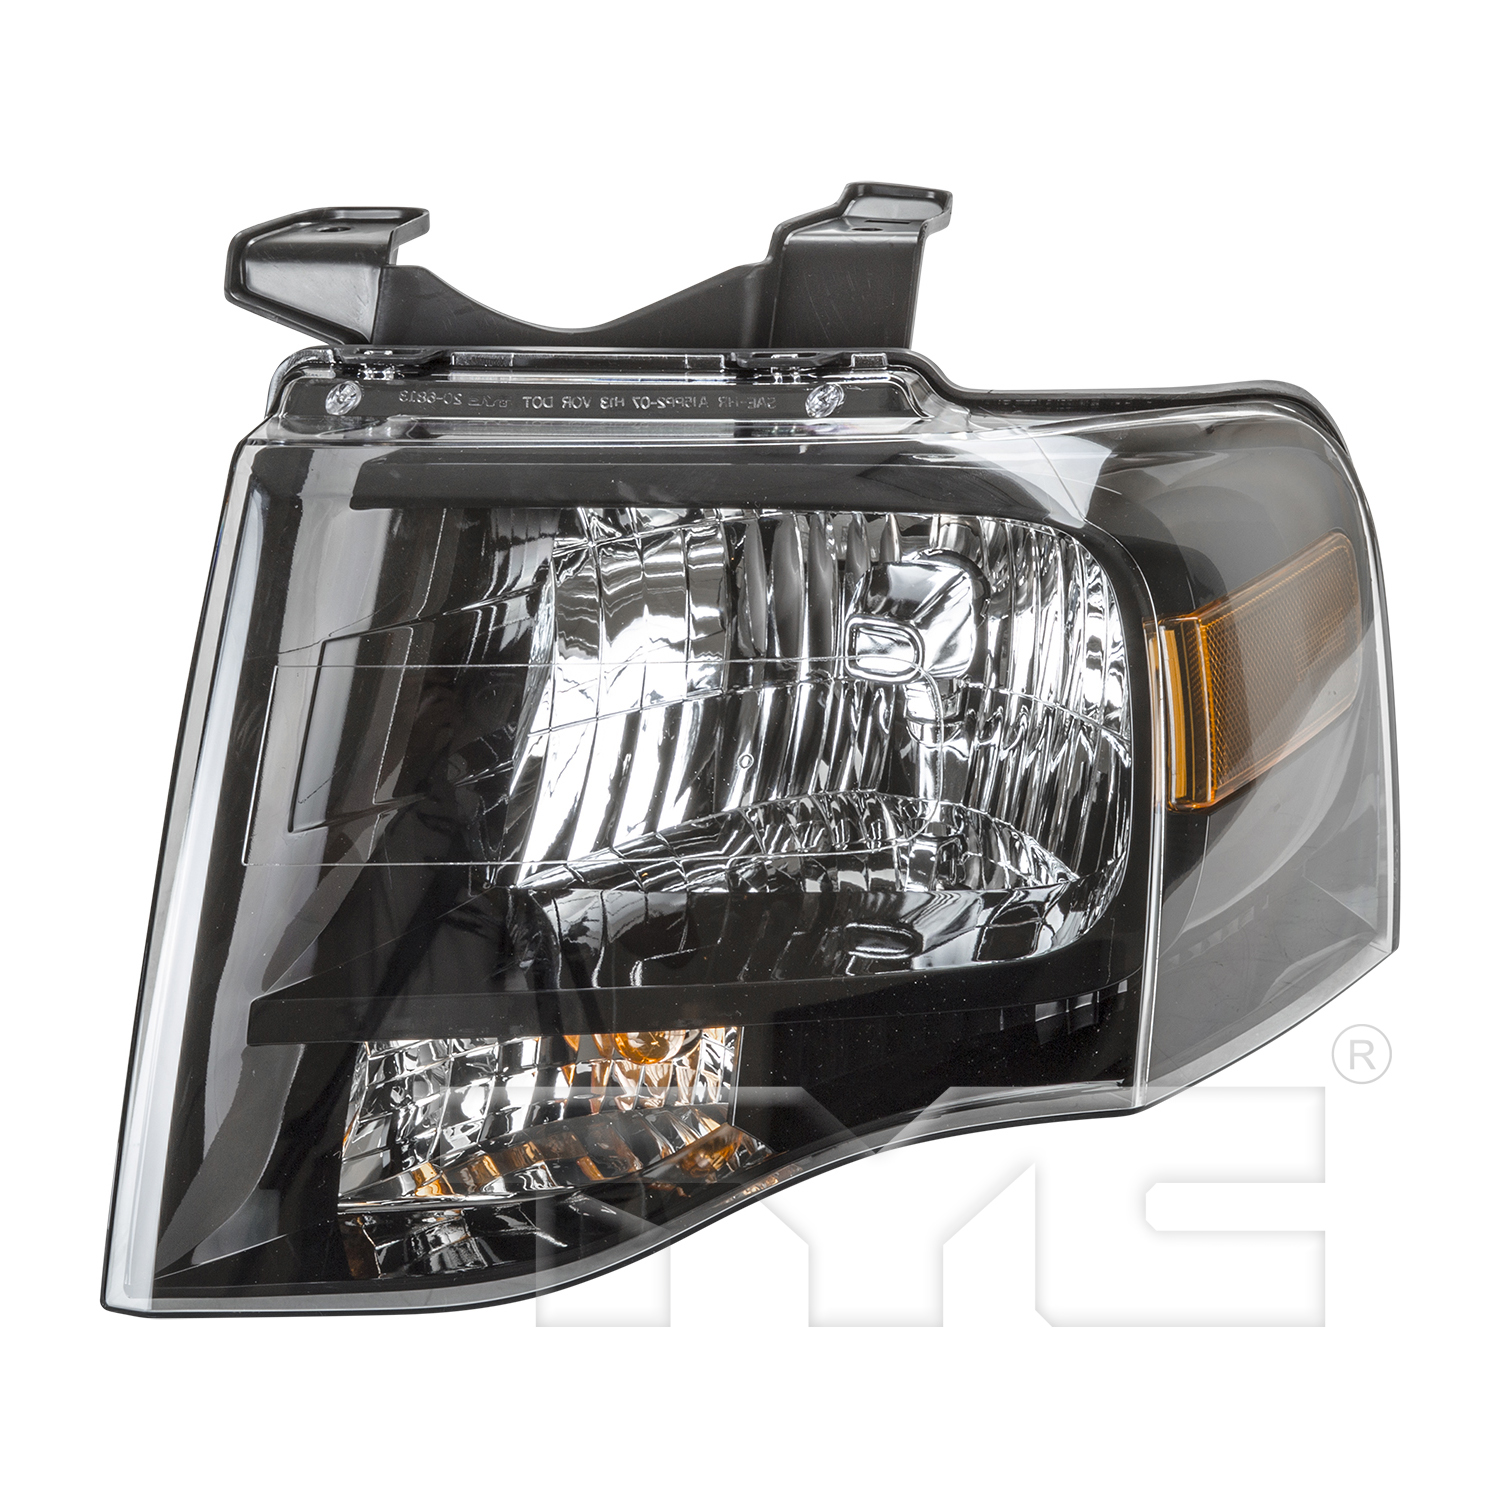 Aftermarket HEADLIGHTS for FORD - EXPEDITION, EXPEDITION,07-14,LT Headlamp assy composite